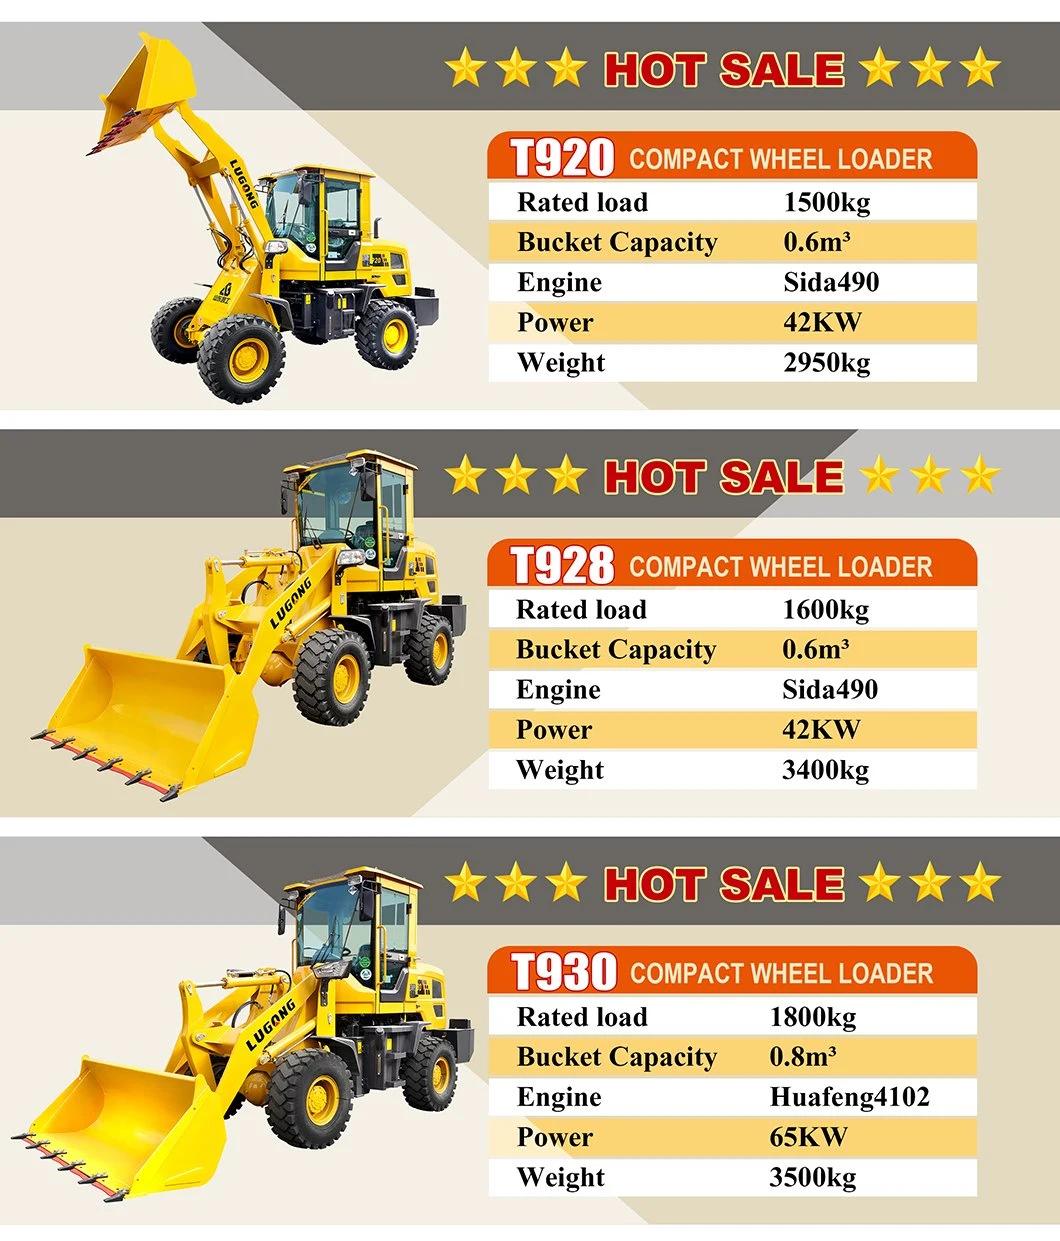 China Lugong Brand Factory New Cheap Mini/Small Loaders Machine Skid Steer/Telescopic 1.5/2.0/2.5t Wheel Loader LG938 with Good Price/Good Service/CE/ISO